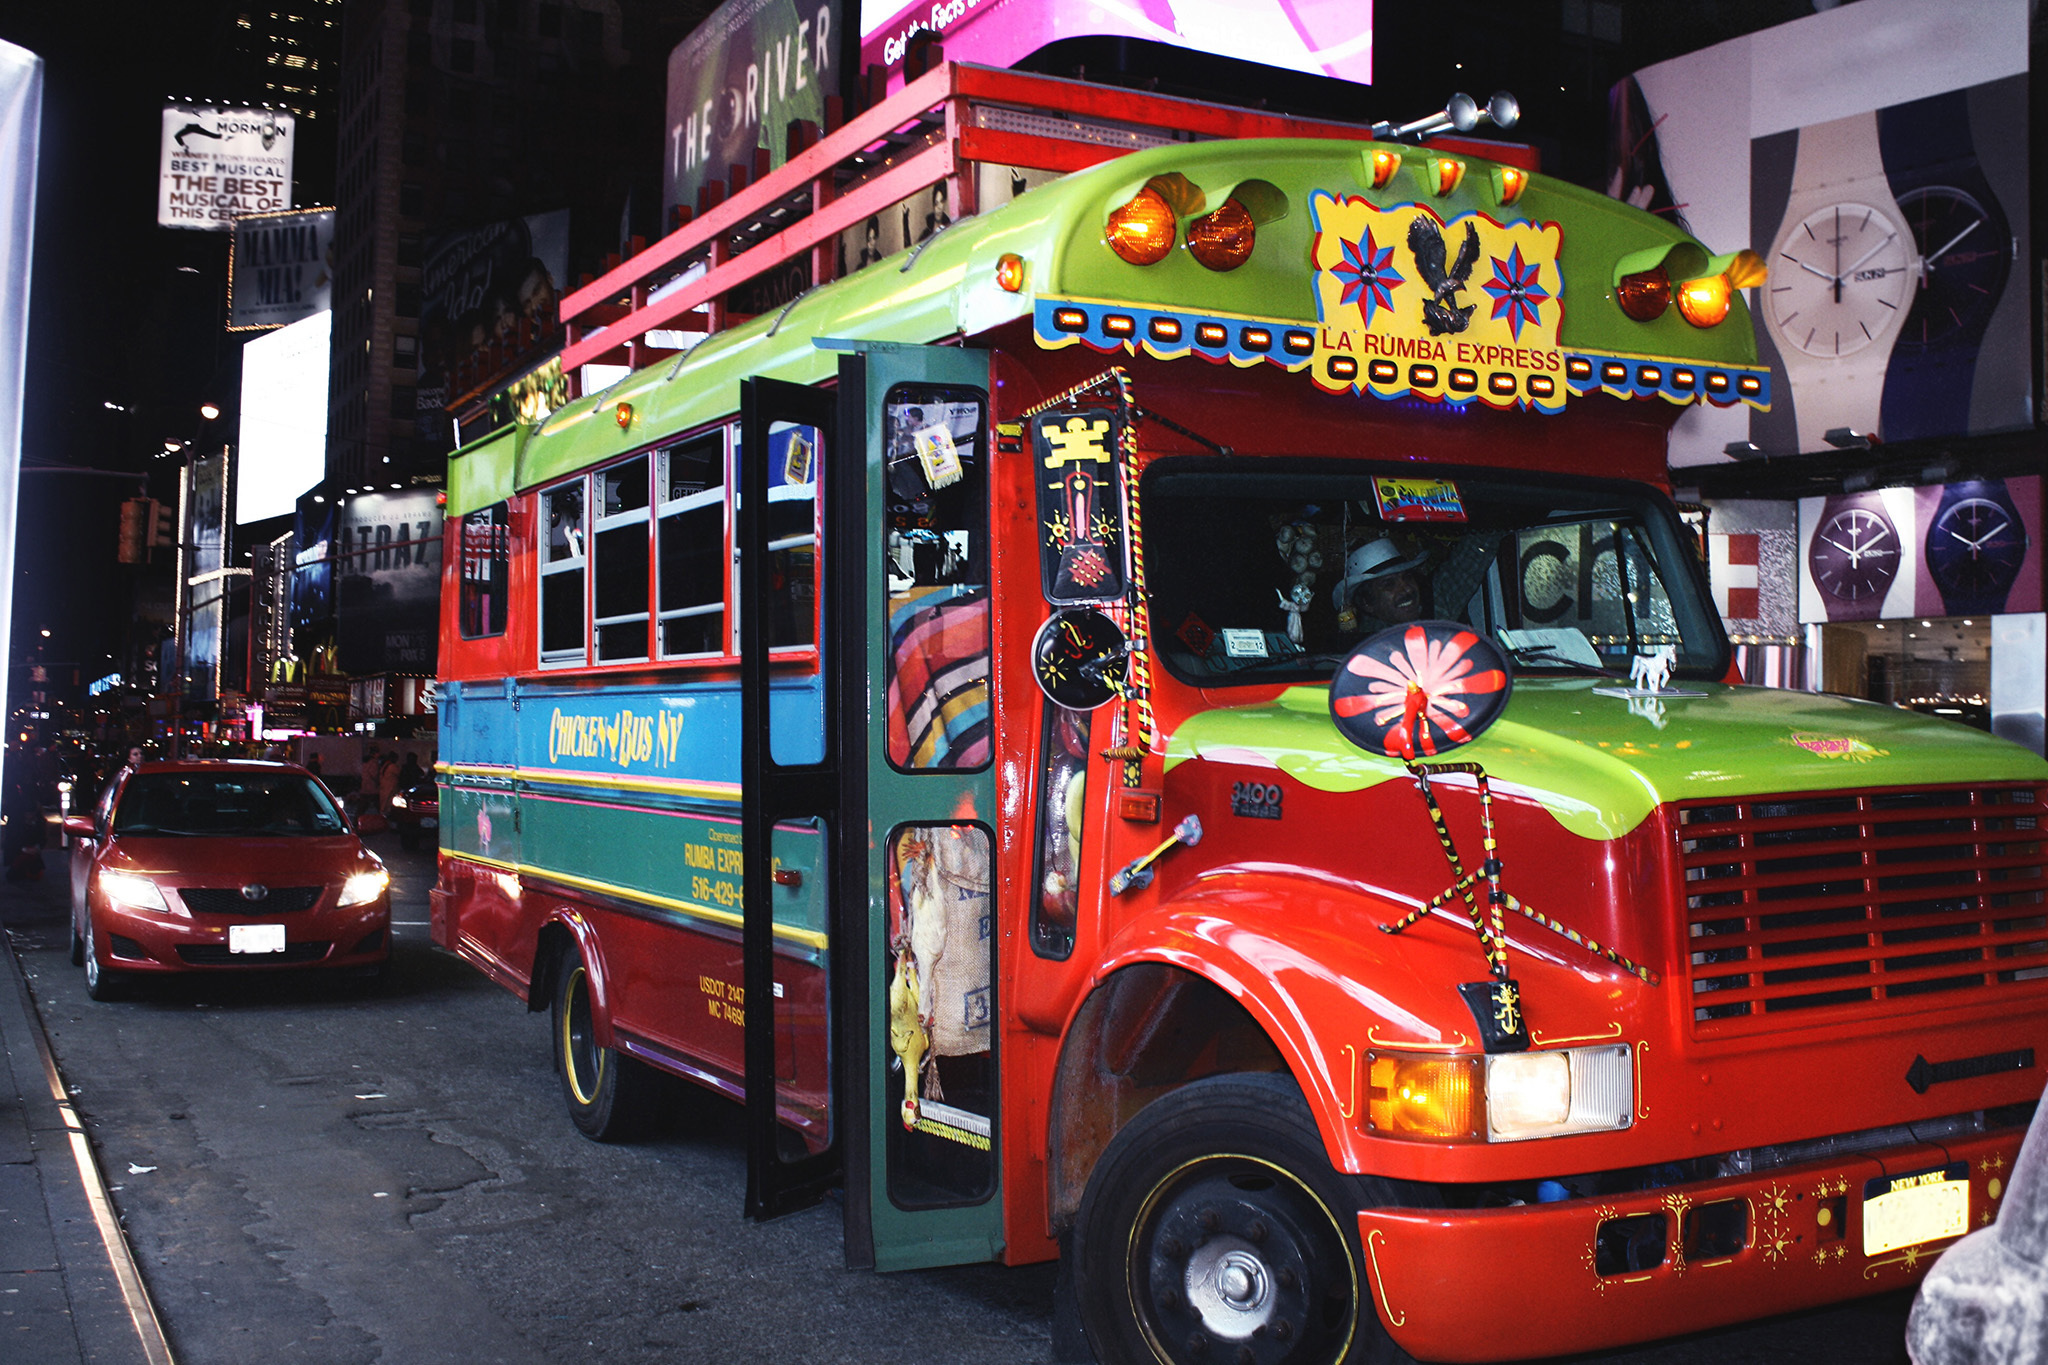 Find a party bus in NYC with TVs, hammocks or BYOB